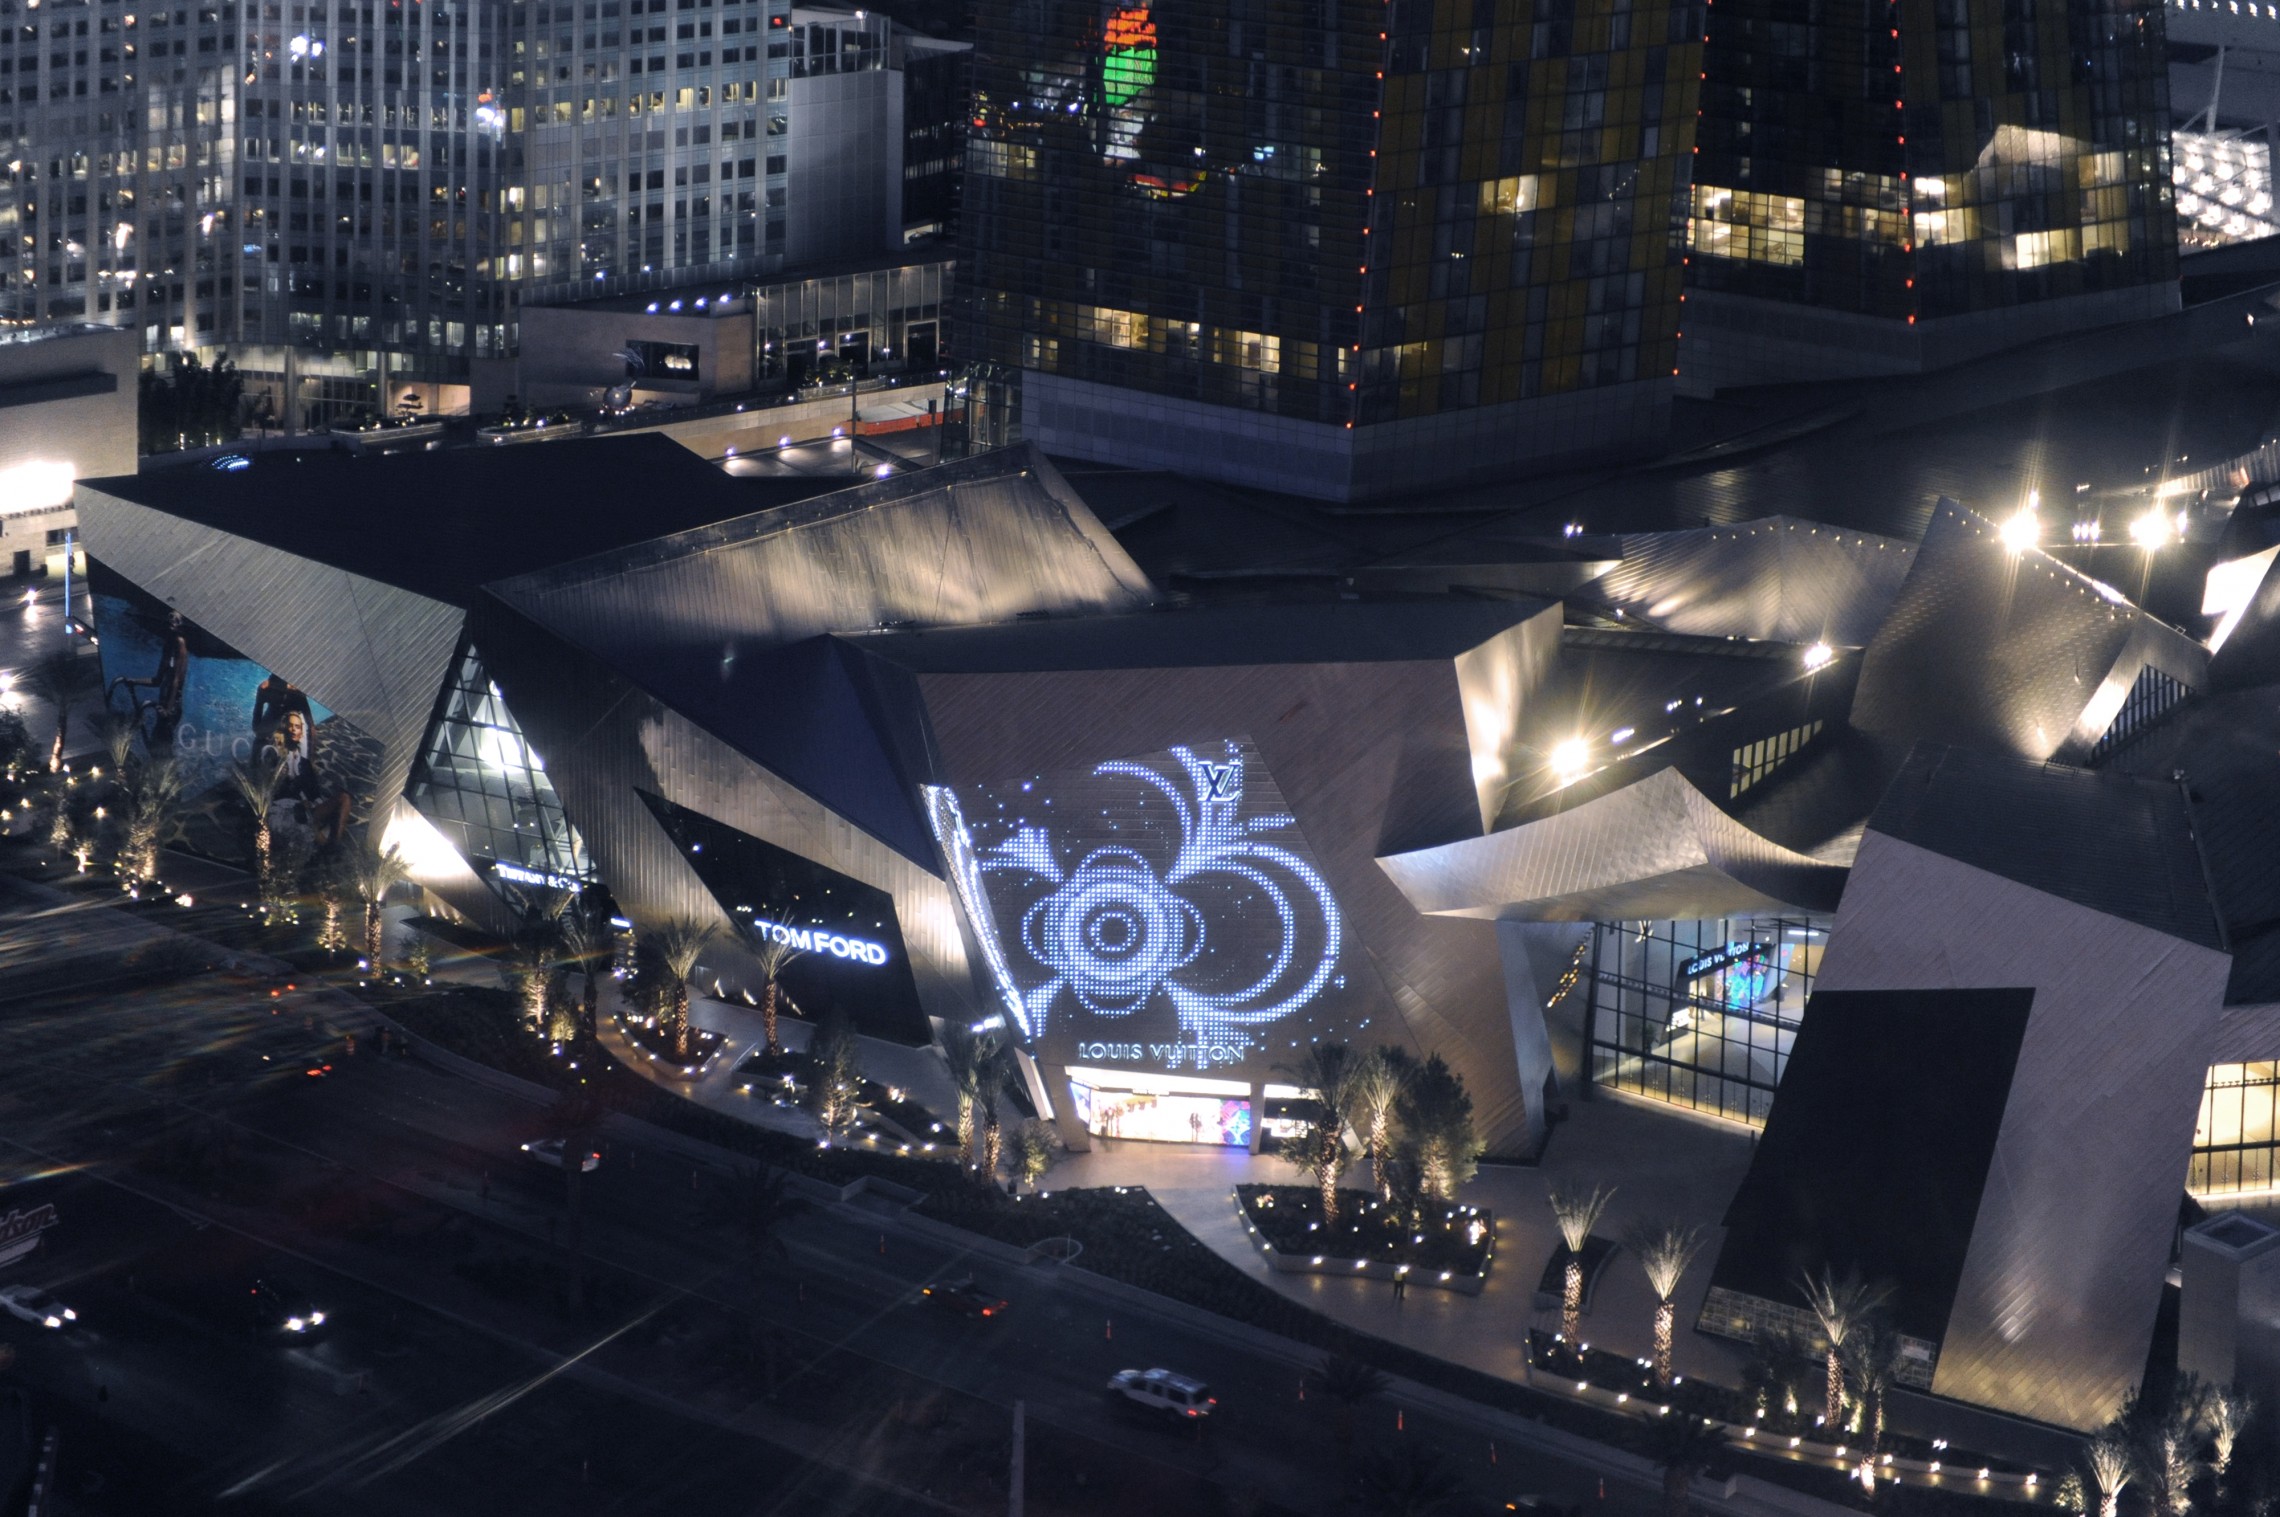 The shops at Crystals by Daniel Libeskind - RTF